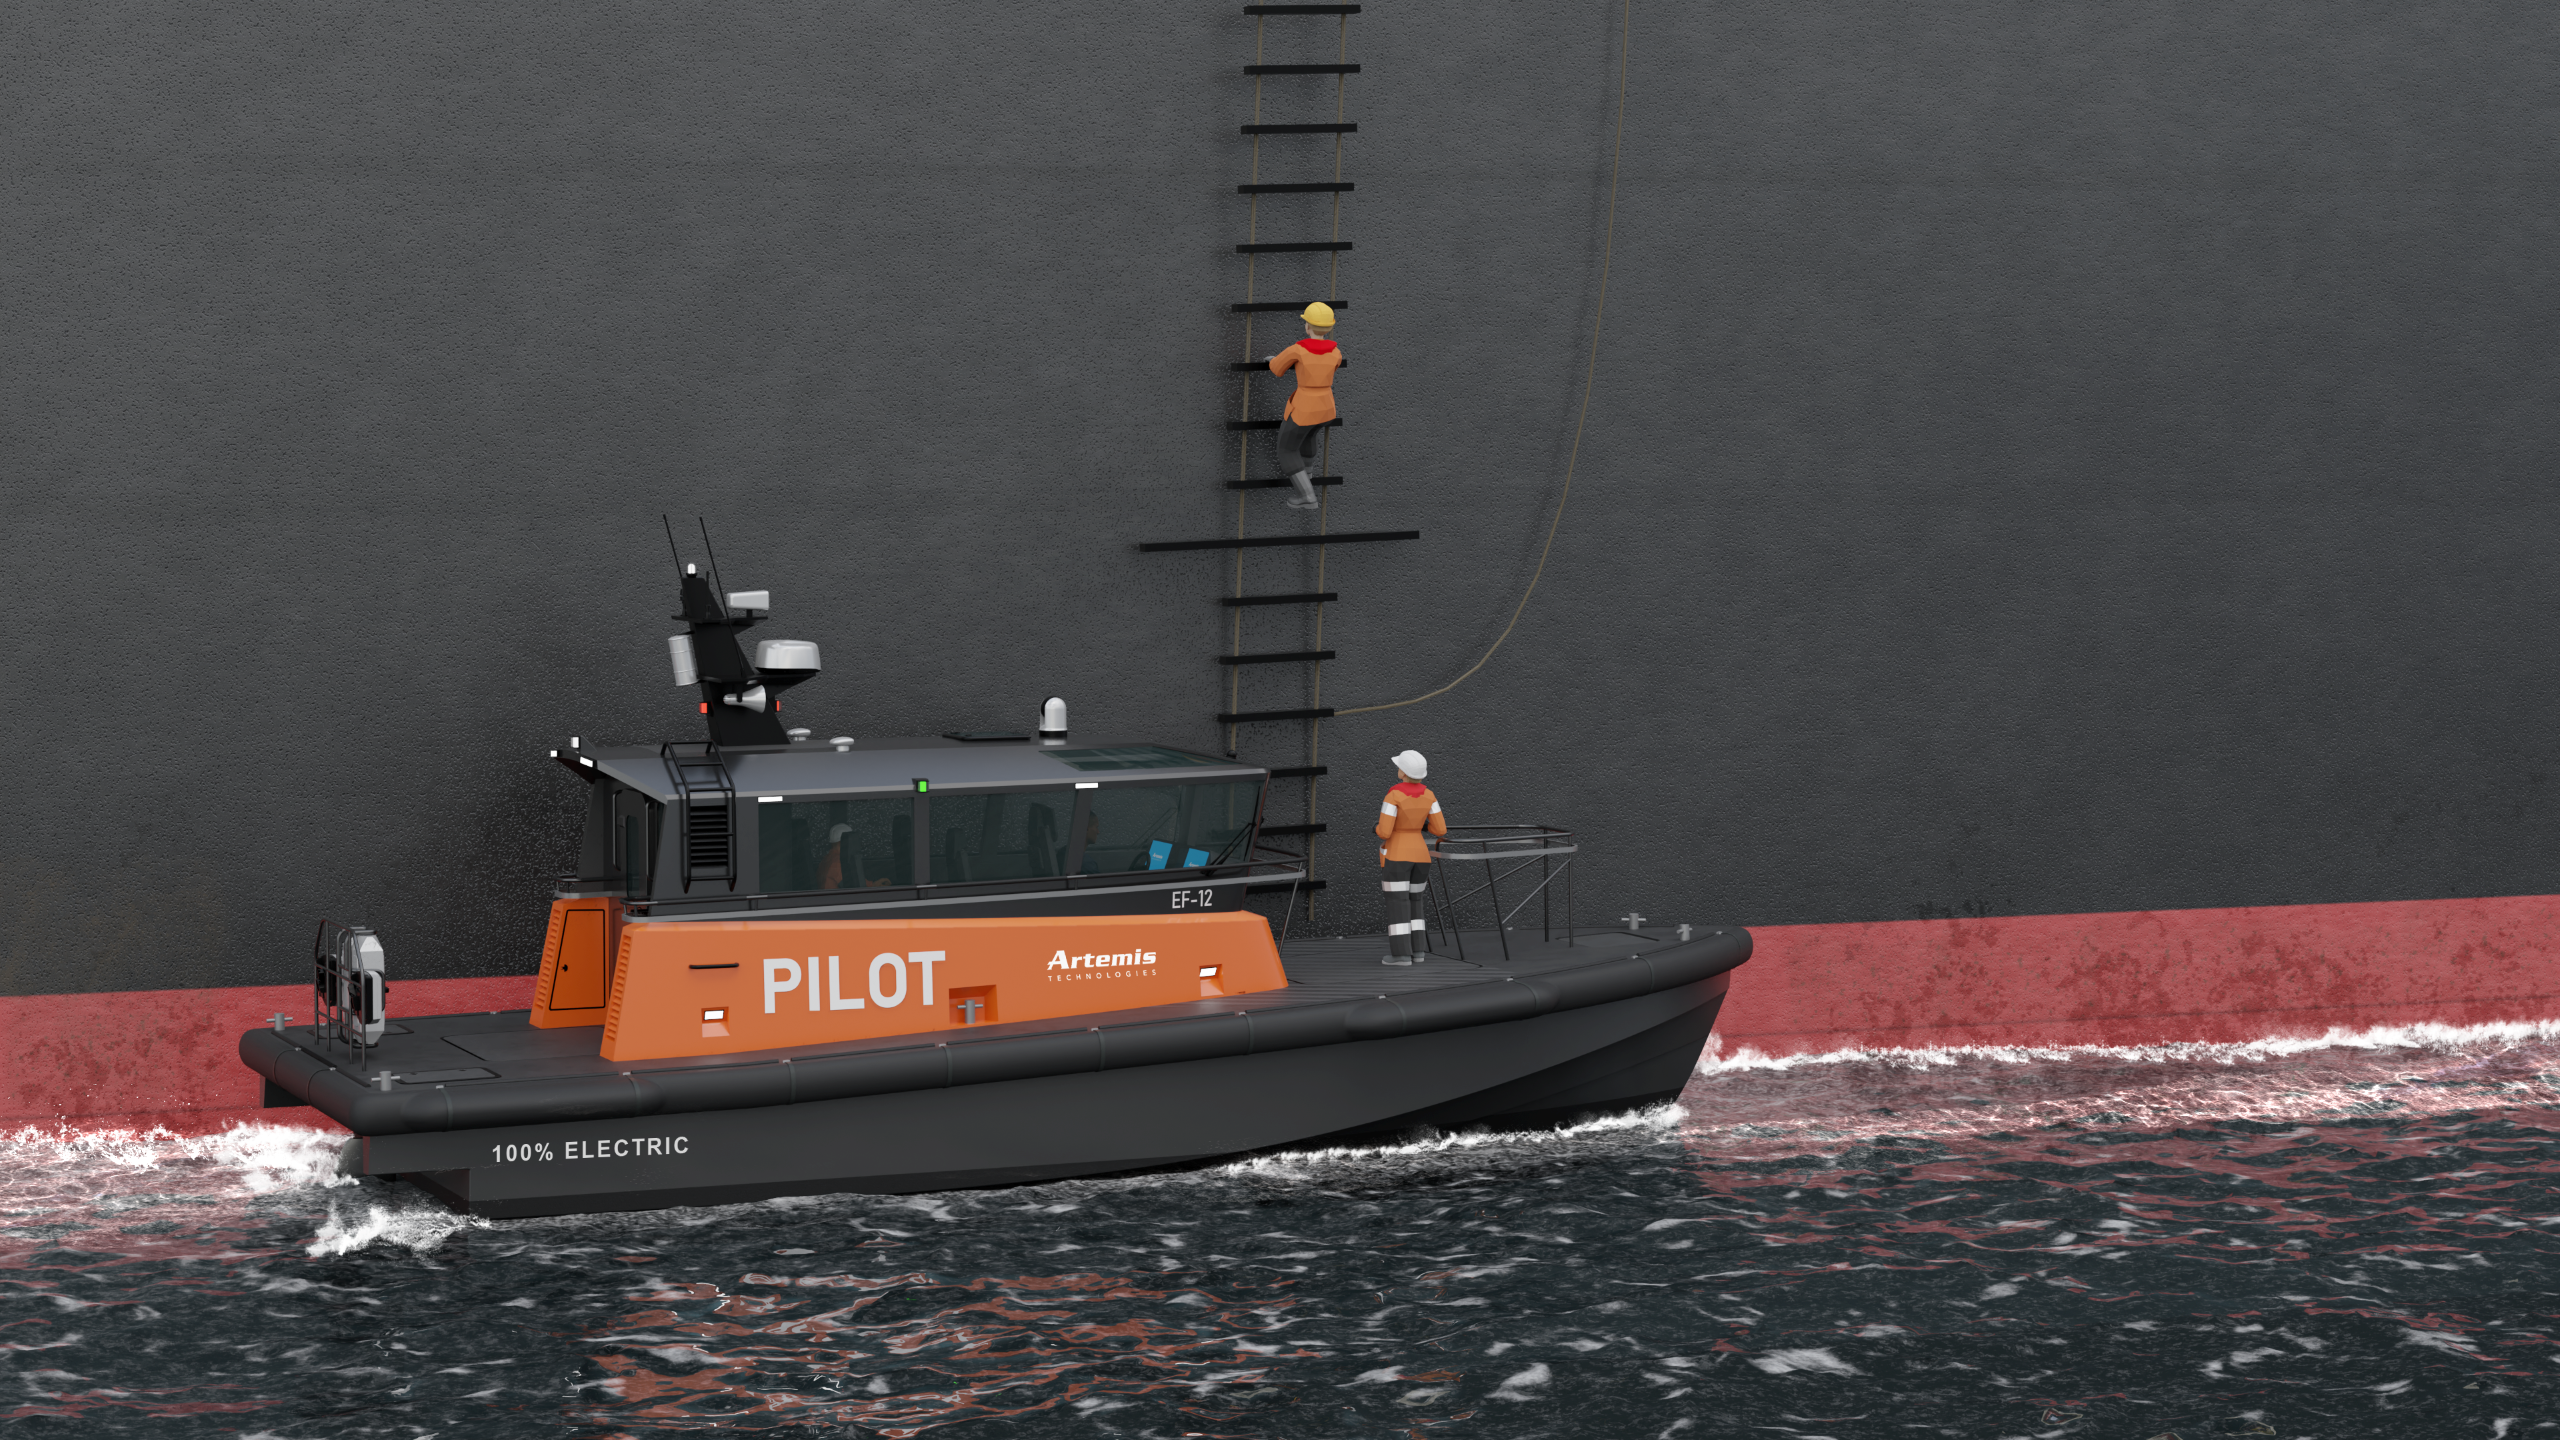 An Artemis EF-12 Pilot boat at a ship and crew making doing a pilot transfer. One marine pilot is climbing the pilot ladder onto the ship.